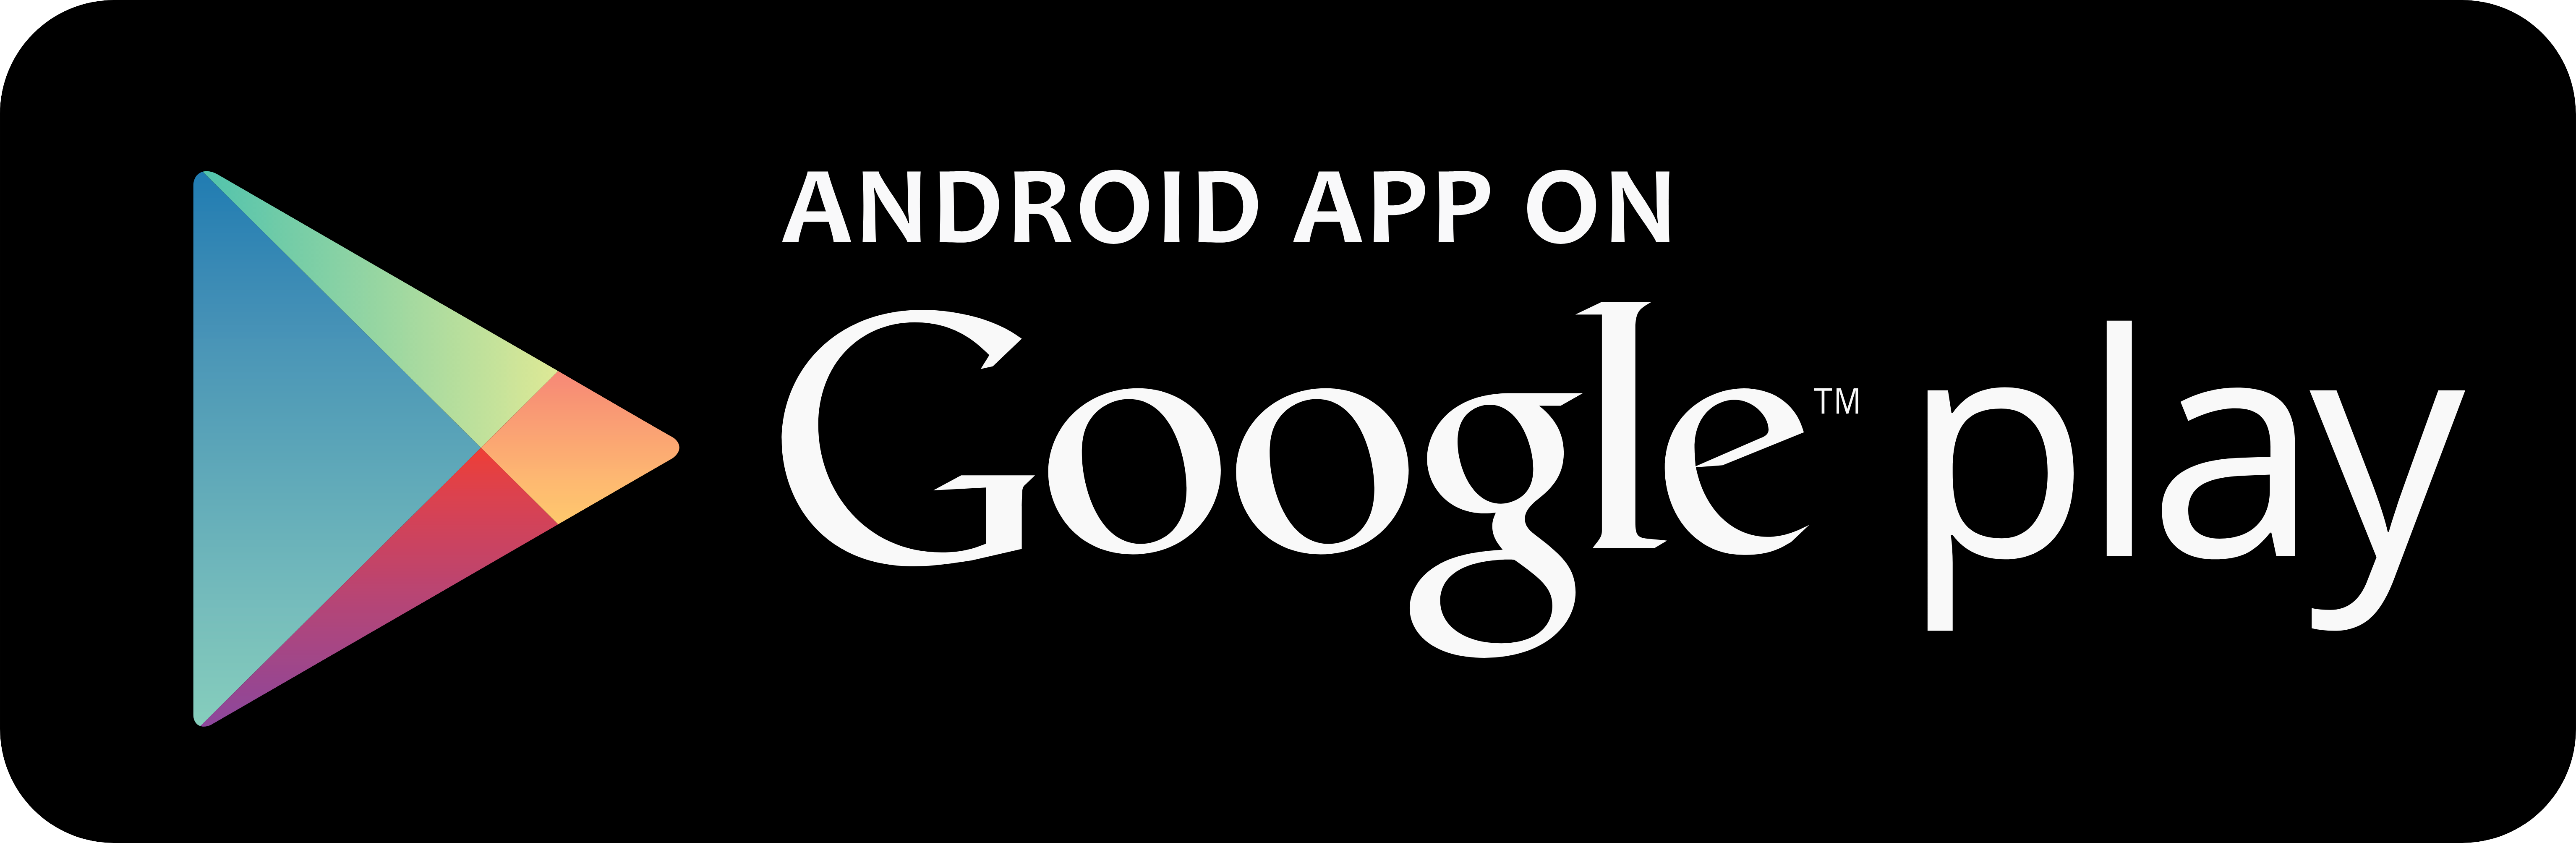 Android app signing. Значок Google Play. App Store Google Play. Плей Маркет лого. Android app on Google Play.